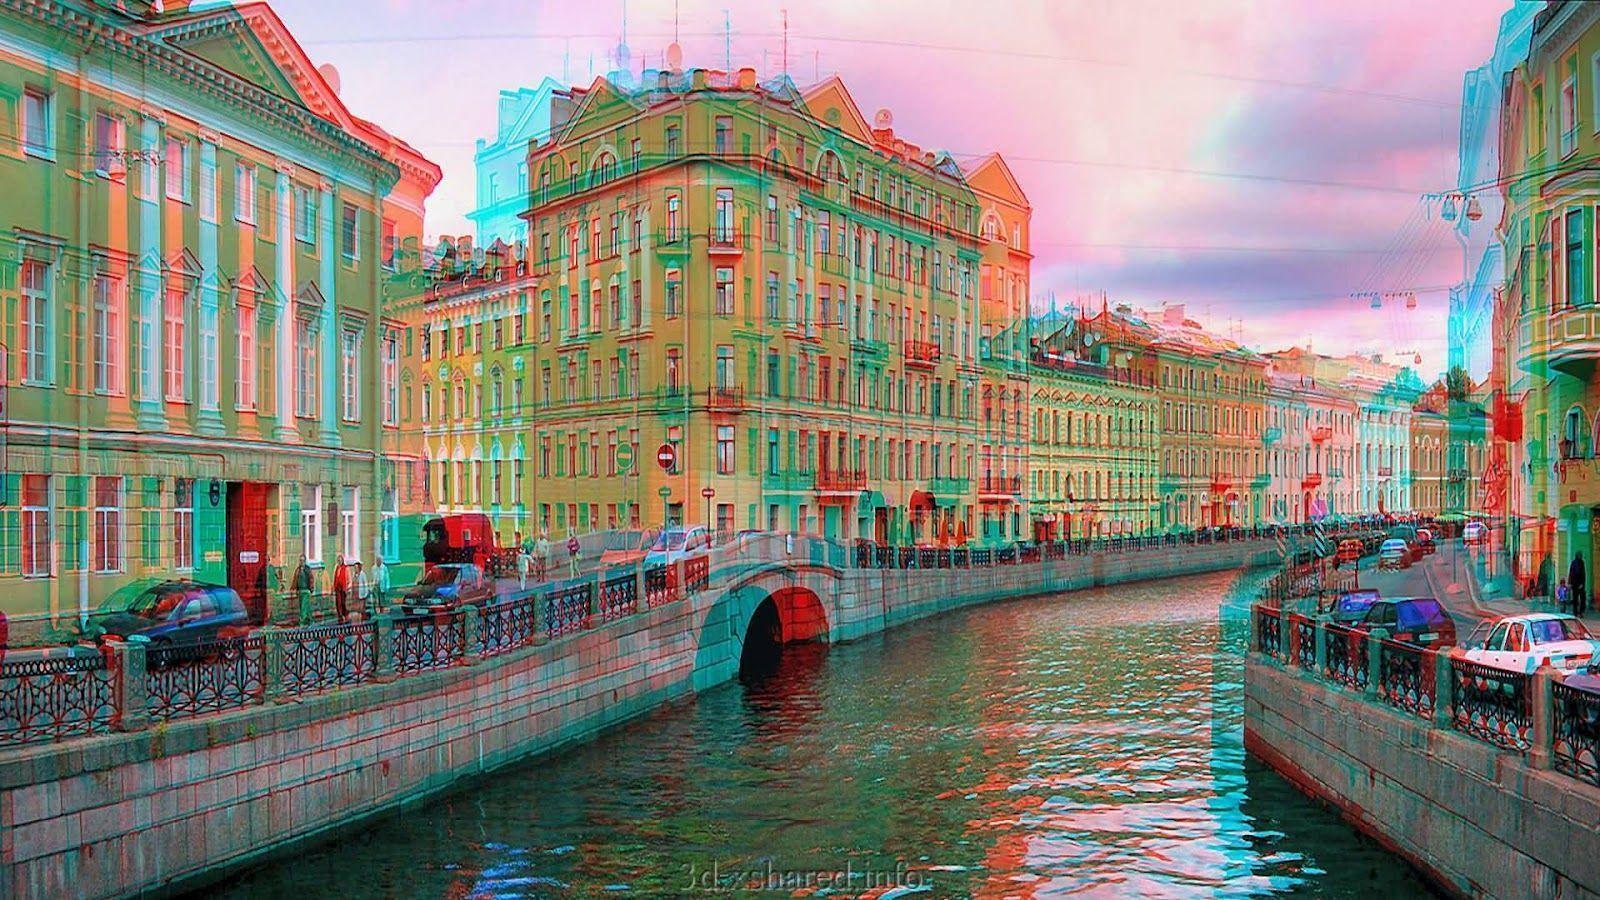 3D Image Movie (3D Glasses Required): River of water amid buildings